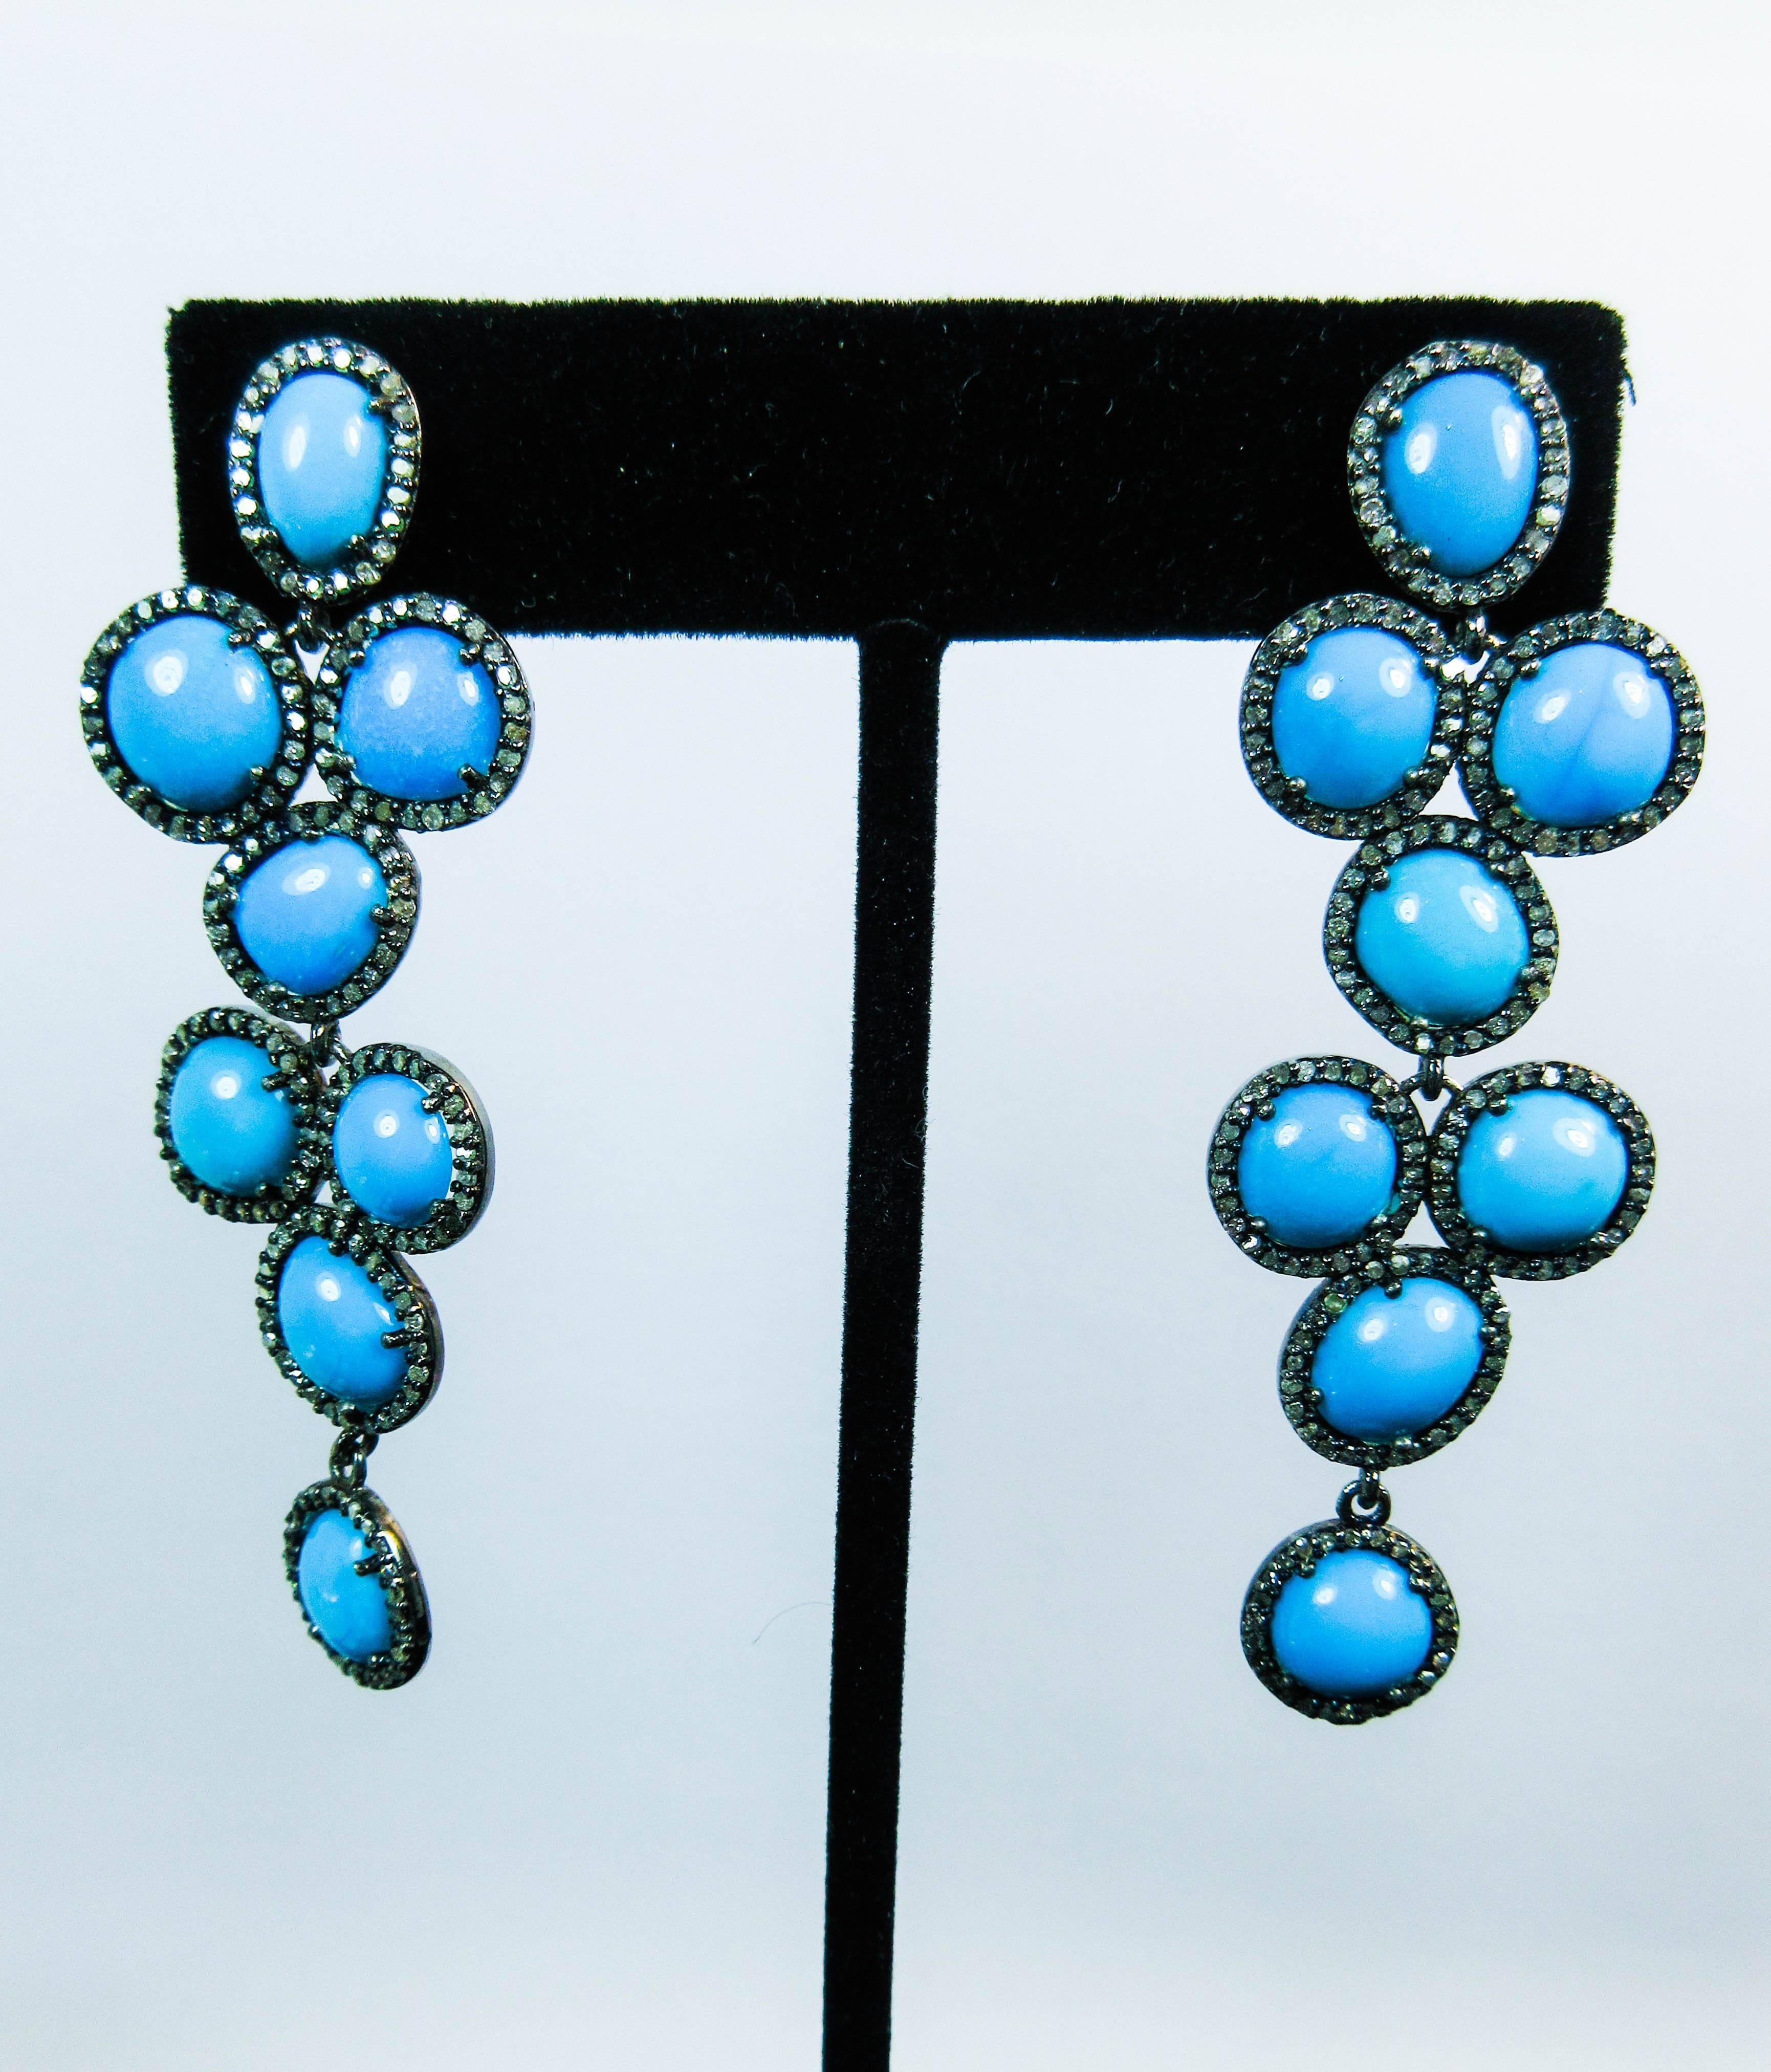 These earrings are composed of turquoise set in silver with pave diamond accents. Features 14KT gold post. In excellent condition.

Please feel free to ask any questions you may have, we are happy to assist. 

Specs:
Silver
Approximately 1.58 Carats